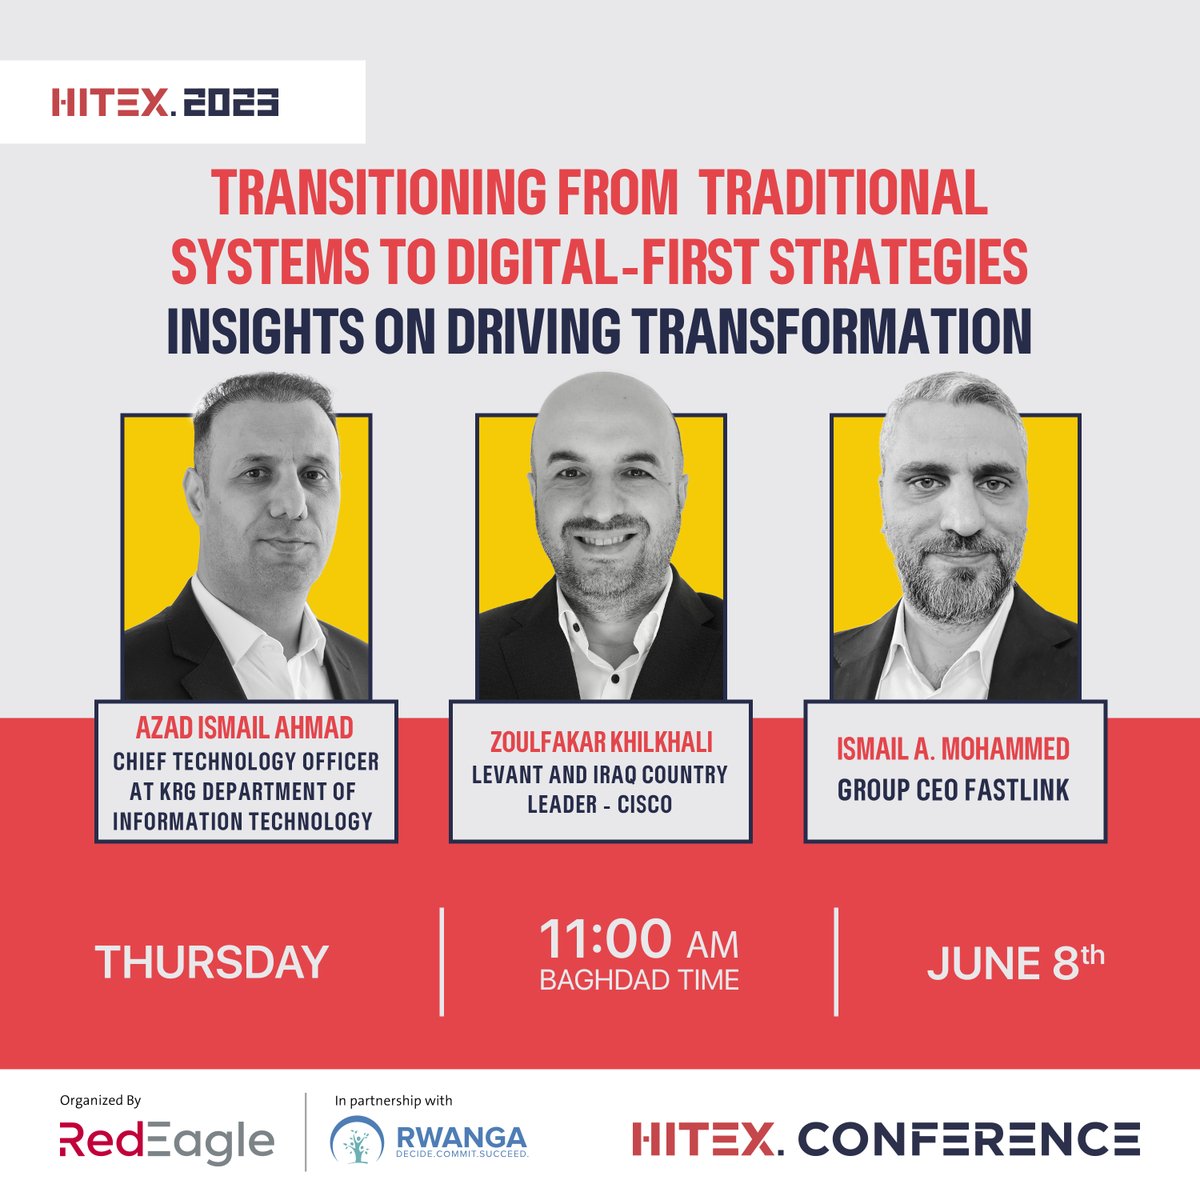 HITEX 2023 Conference

Panel Topic: Transitioning from Traditional Systems to Digital-First Strategies: Insights on Driving Transformation
Date: Thursday 8/6/2023
Time: 11:00 AM
Venue: Erbil International Fairground

Attendance is free and for all

Pre-register now and in less…